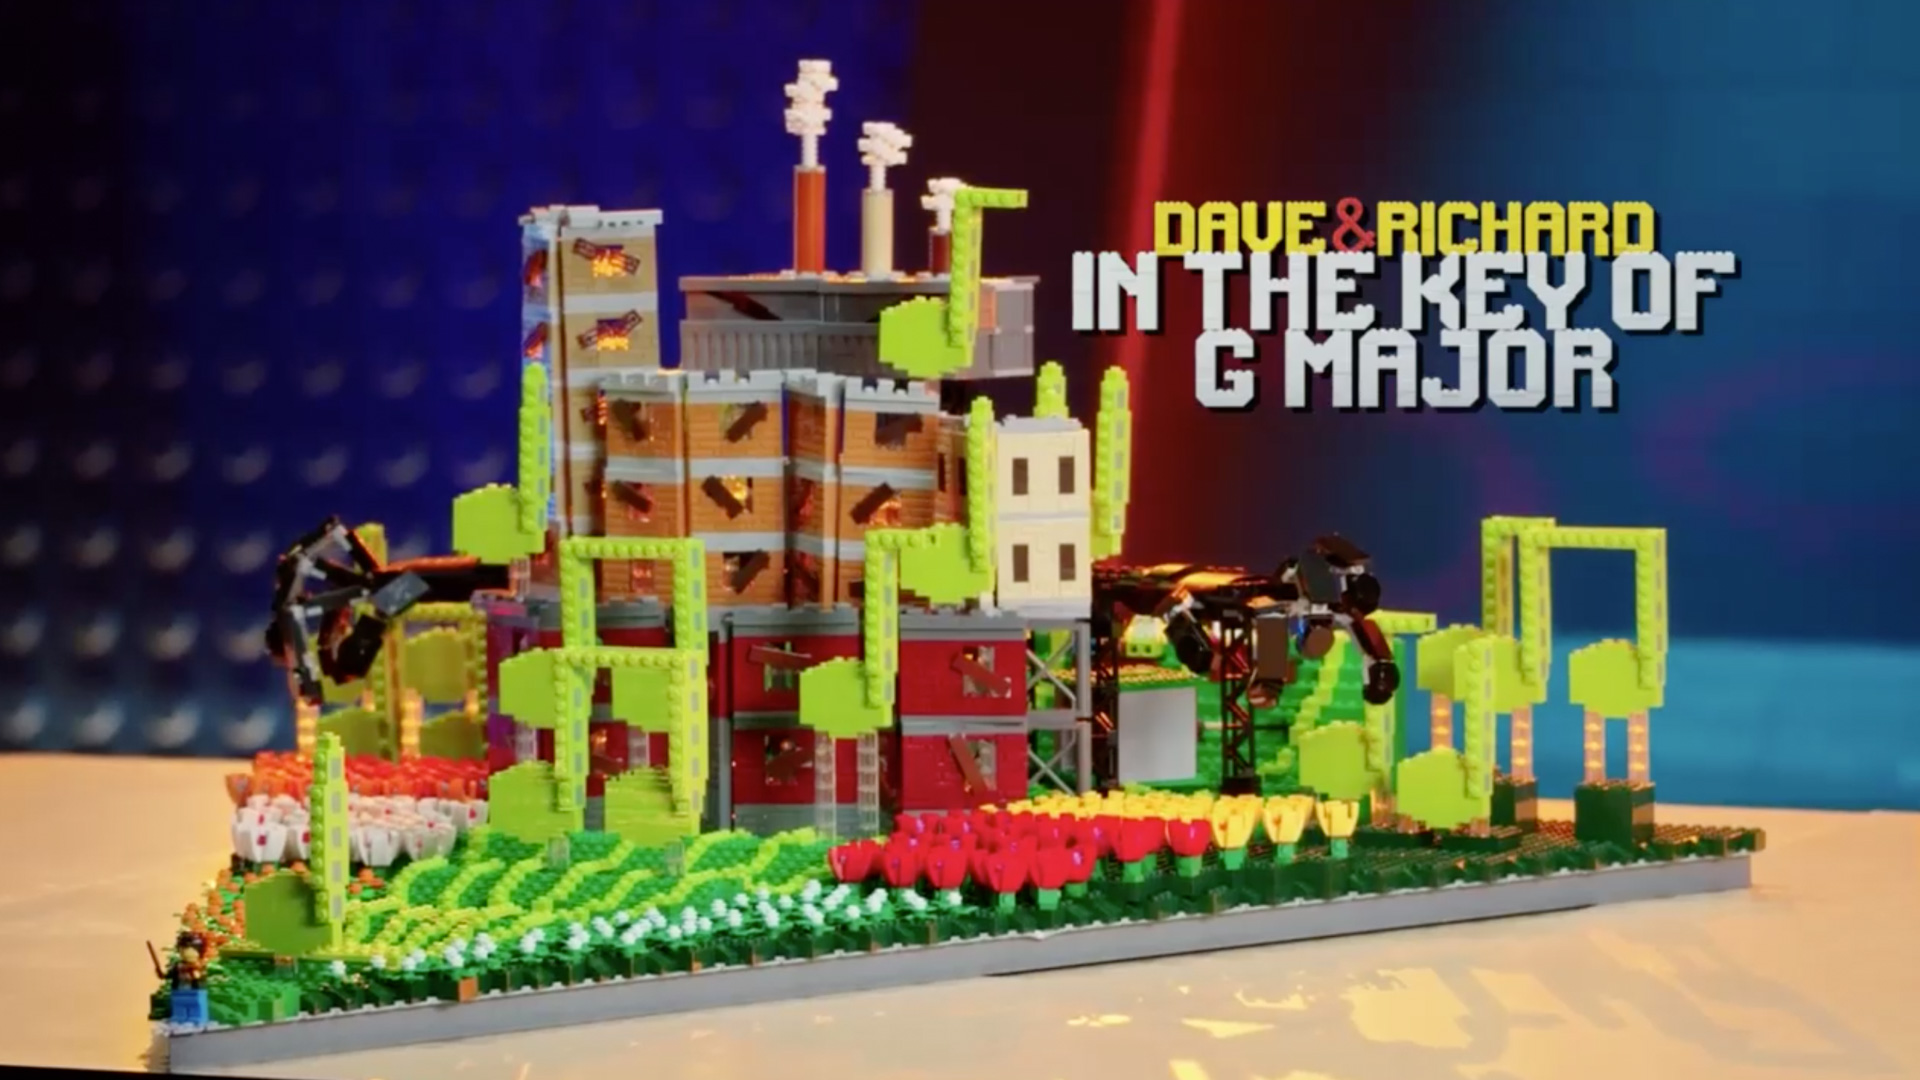 LEGO Masters U.S Season 2 – Explosion Challenge – Dave and Richard - Violin Guy - Dust - In The Key Of G Major